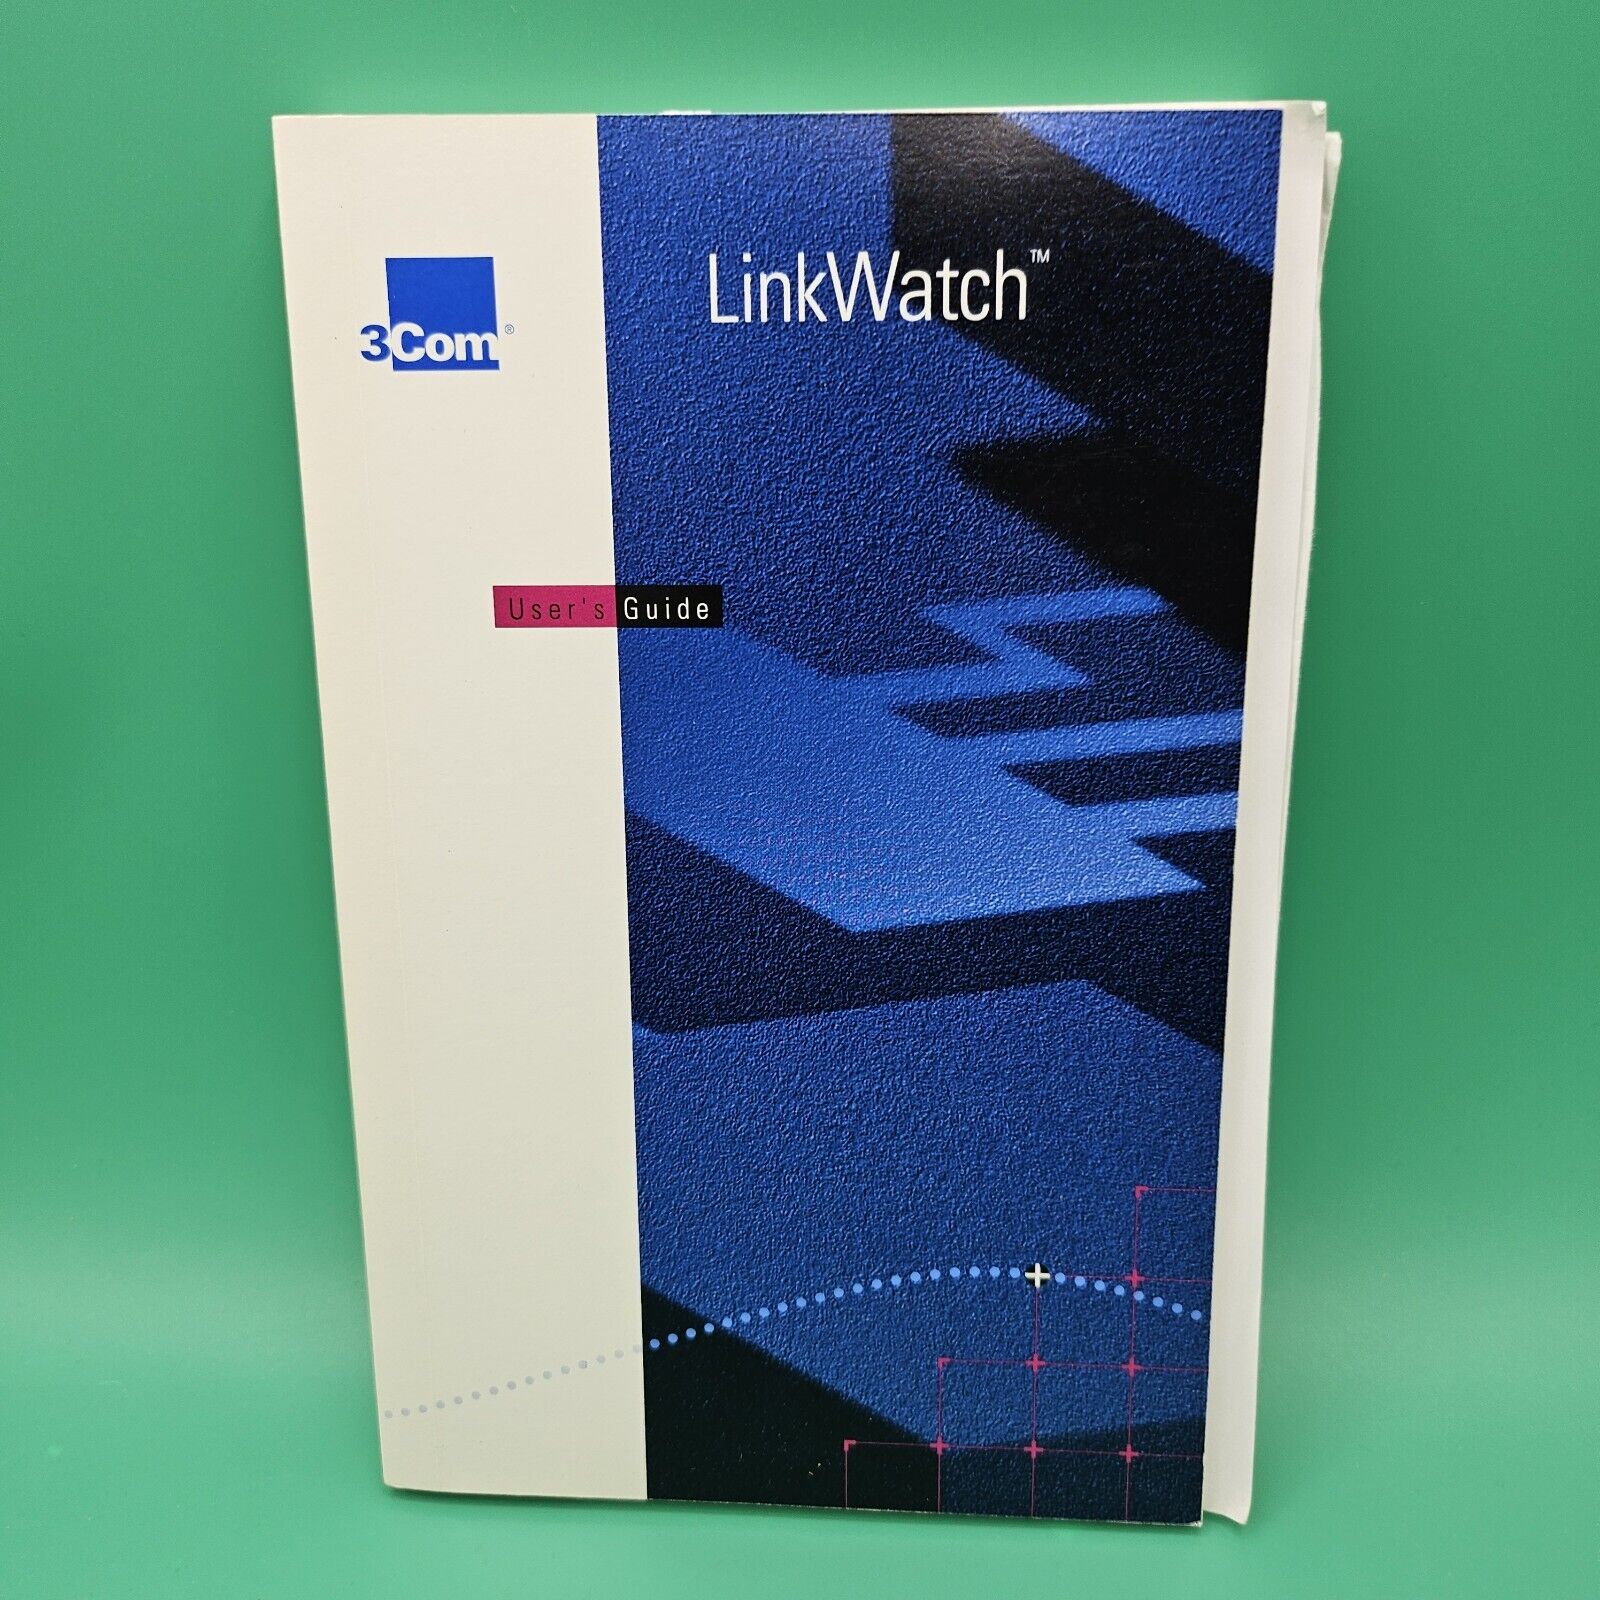 3COM LinkWatch Vintage User's Guide Software Booklet And Insert 1992 VG+ RARE